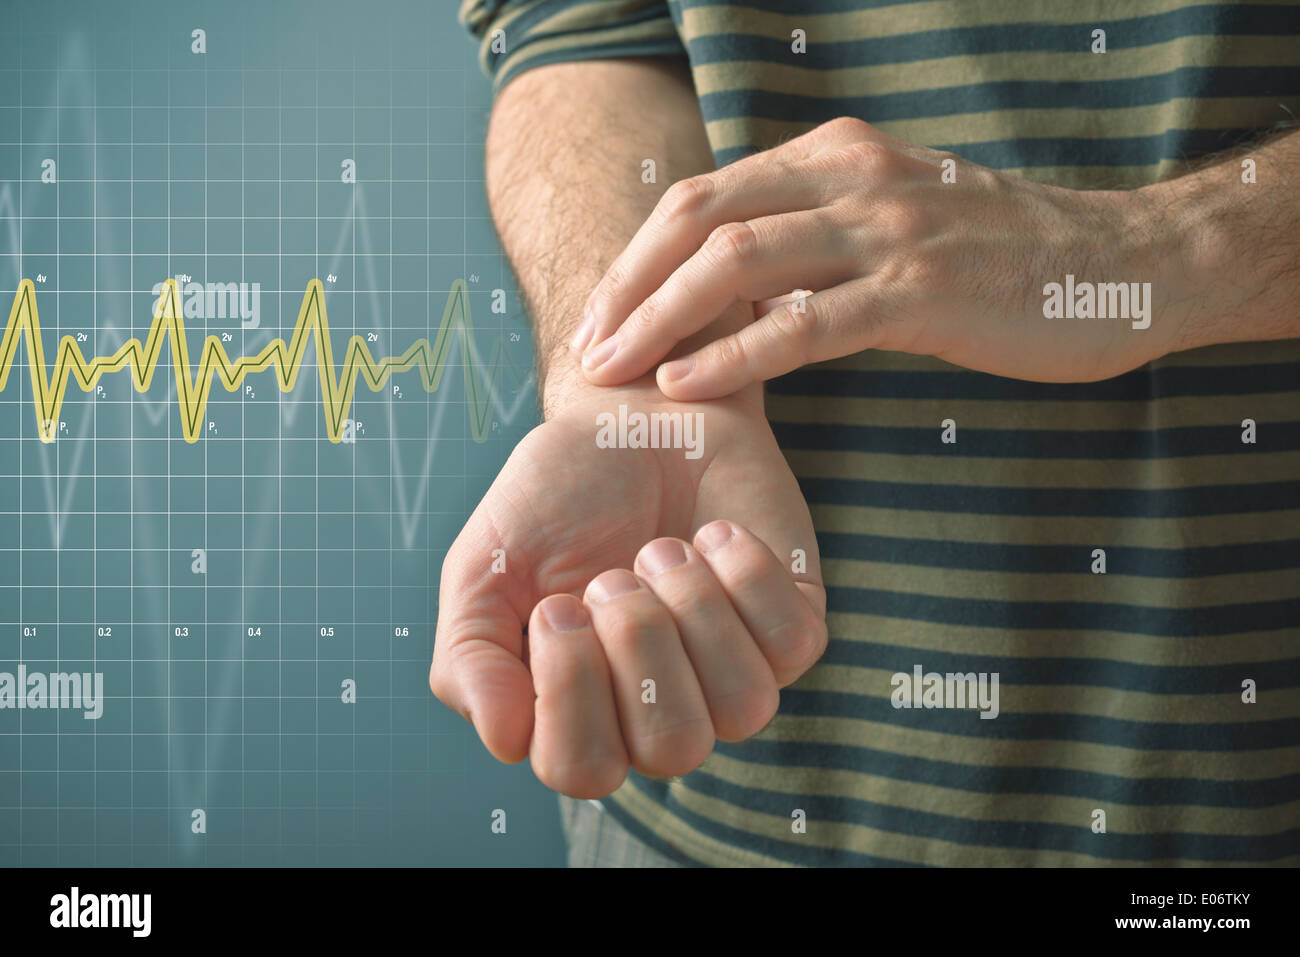 Man checking his pulse by pressing the wrist with fingers. Health issues concept. Stock Photo